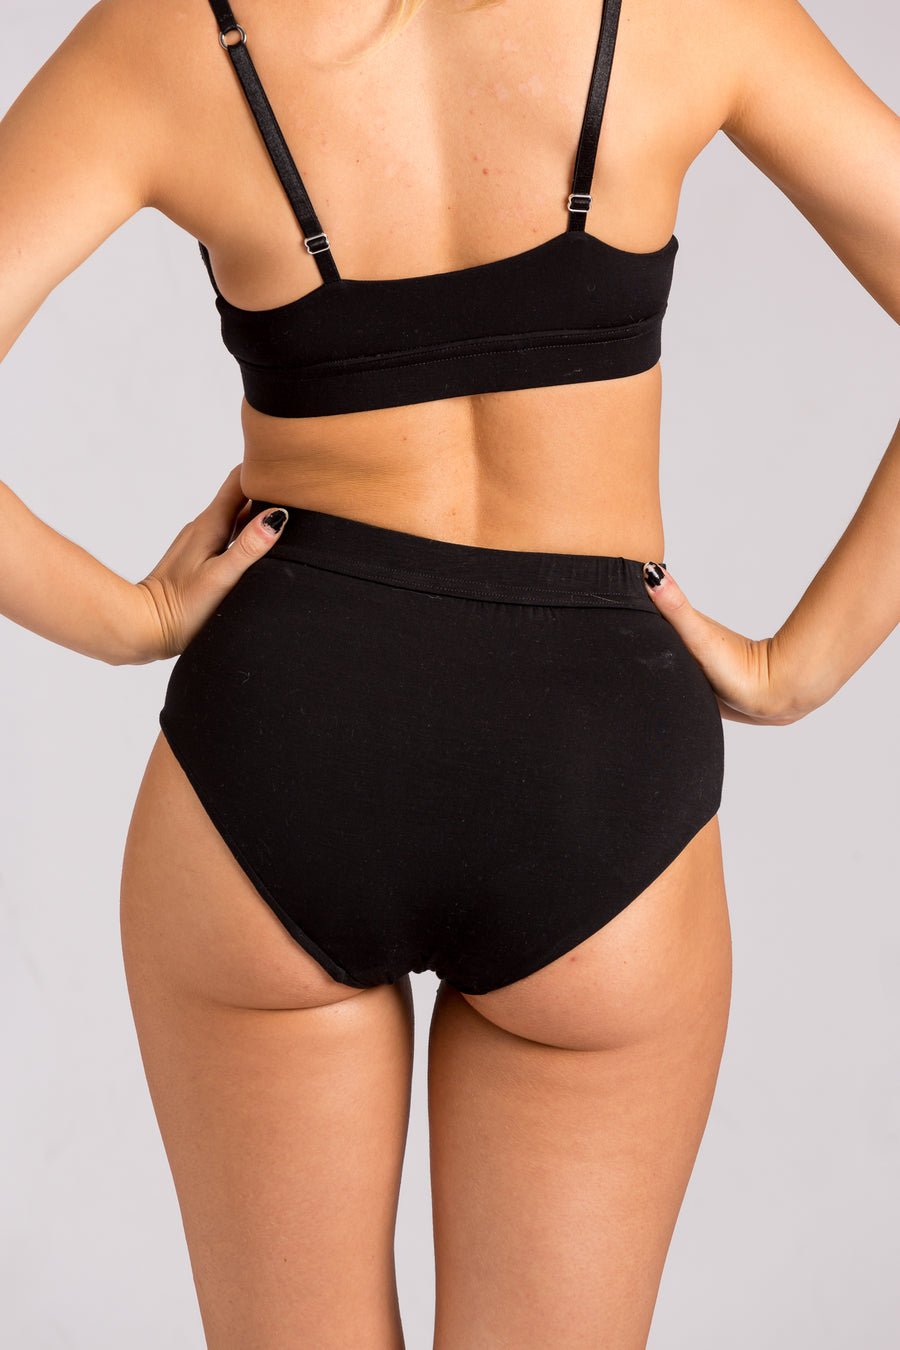 sustainable seaweed underwear. made from seaweed made in london. high waisted black full coverage brief. wrapped waistband makes it super soft on the wearers waist.